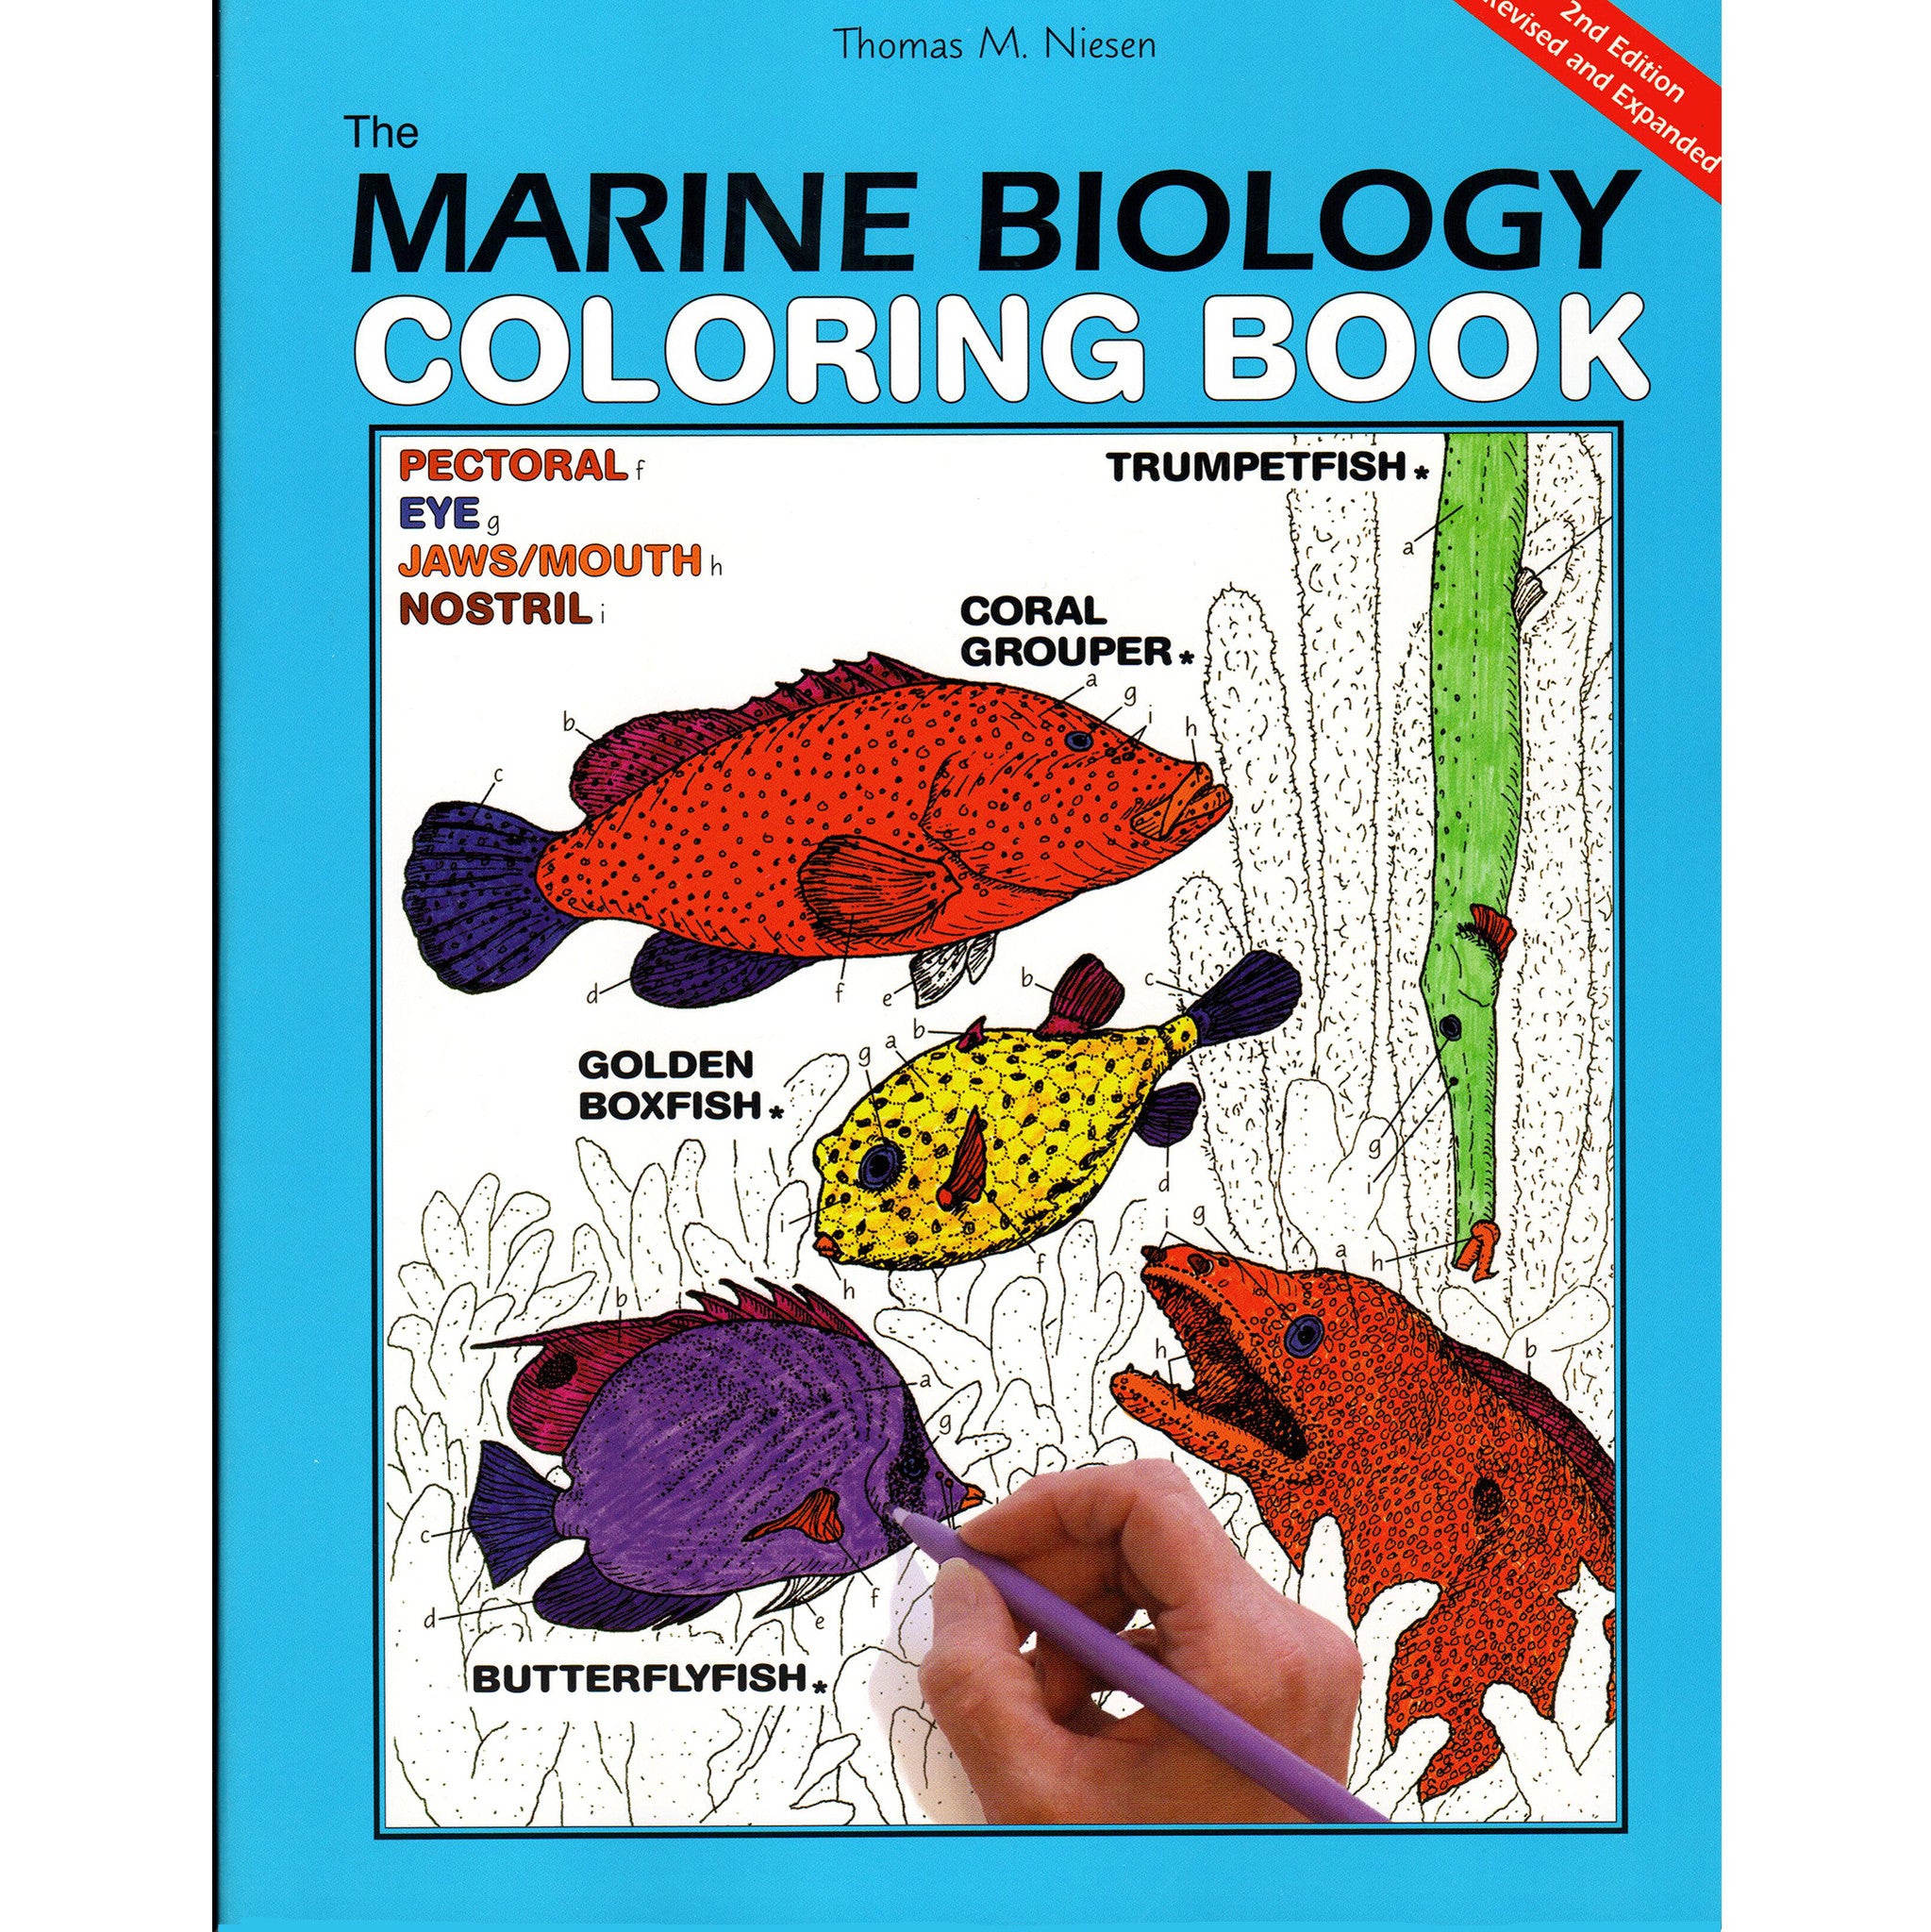 The Marine Biology Coloring Book